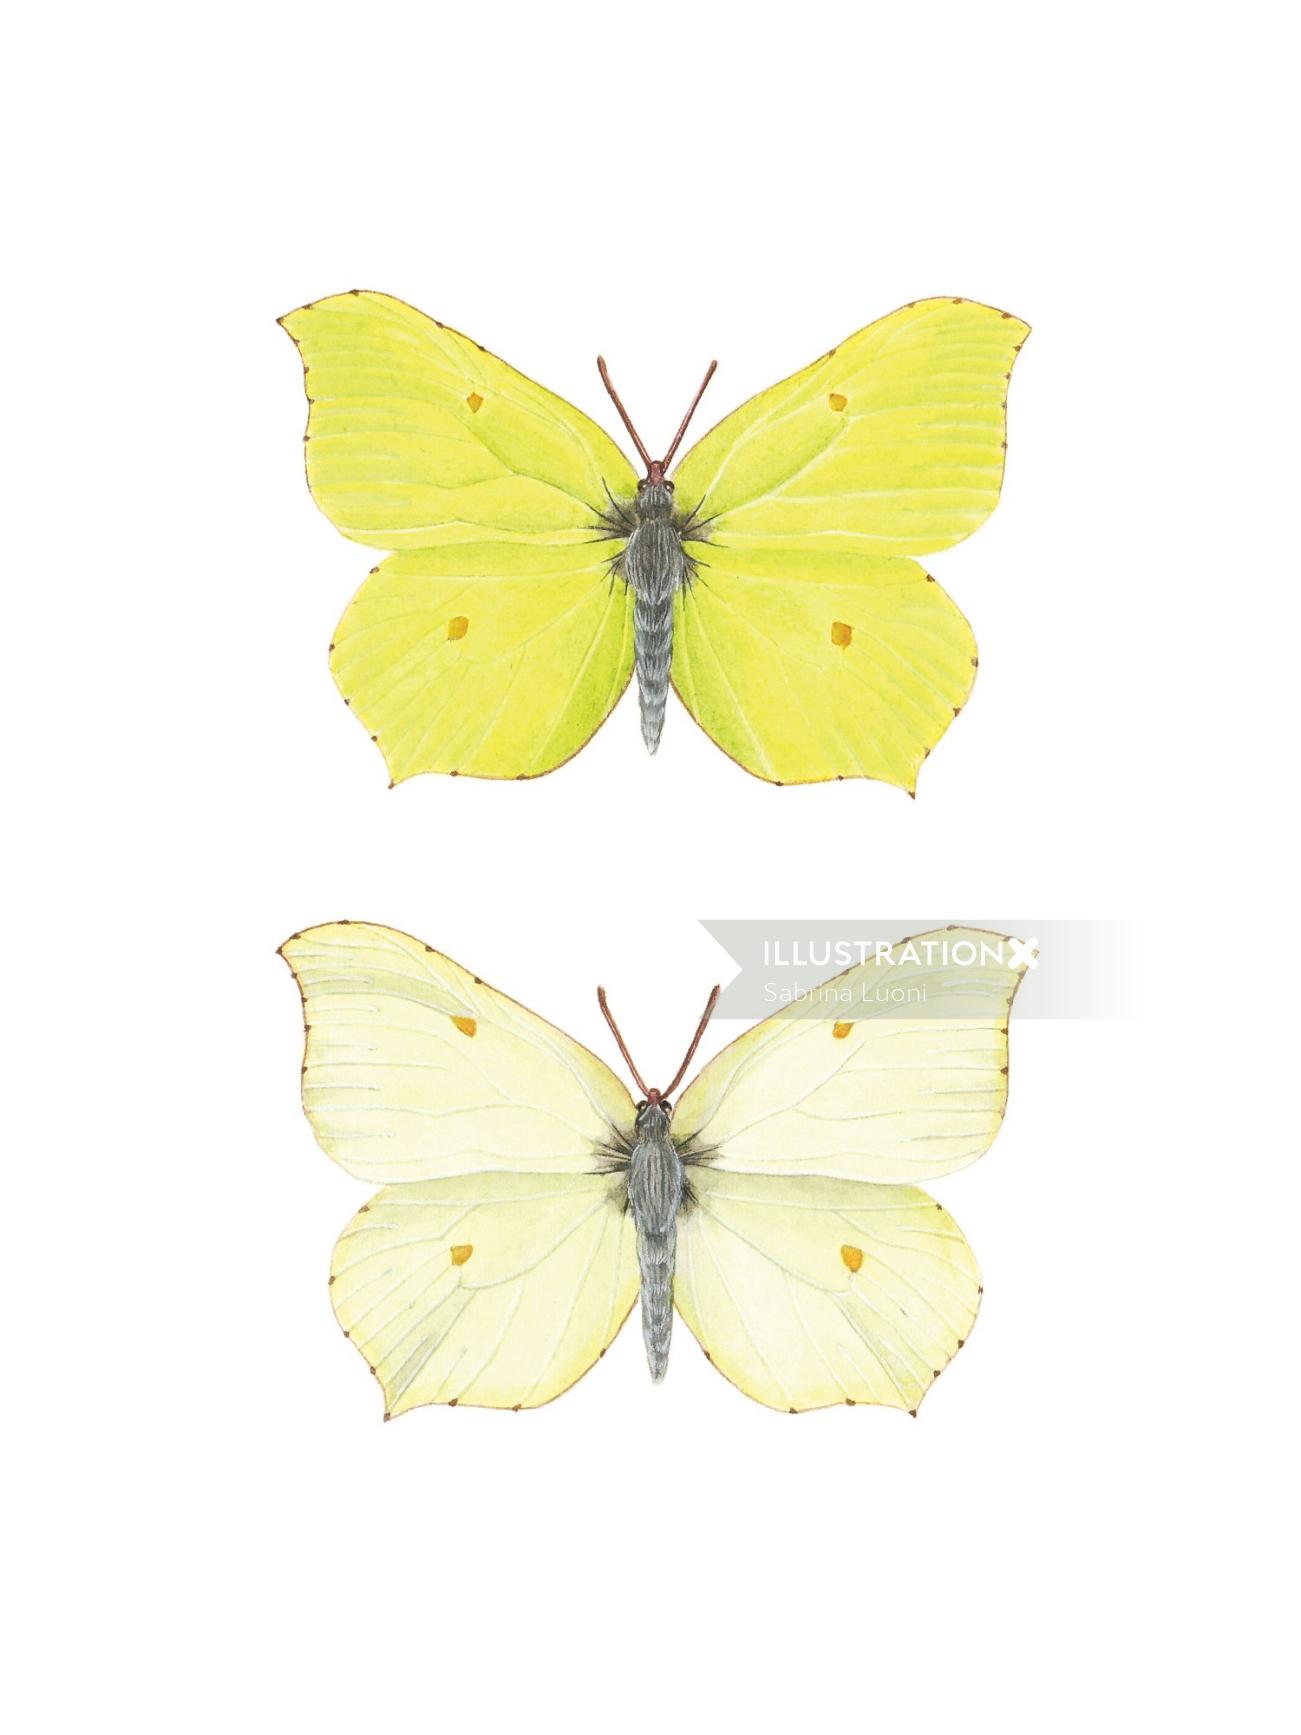 Naturalistic art of Brimstone Butterfly, Dimorphism